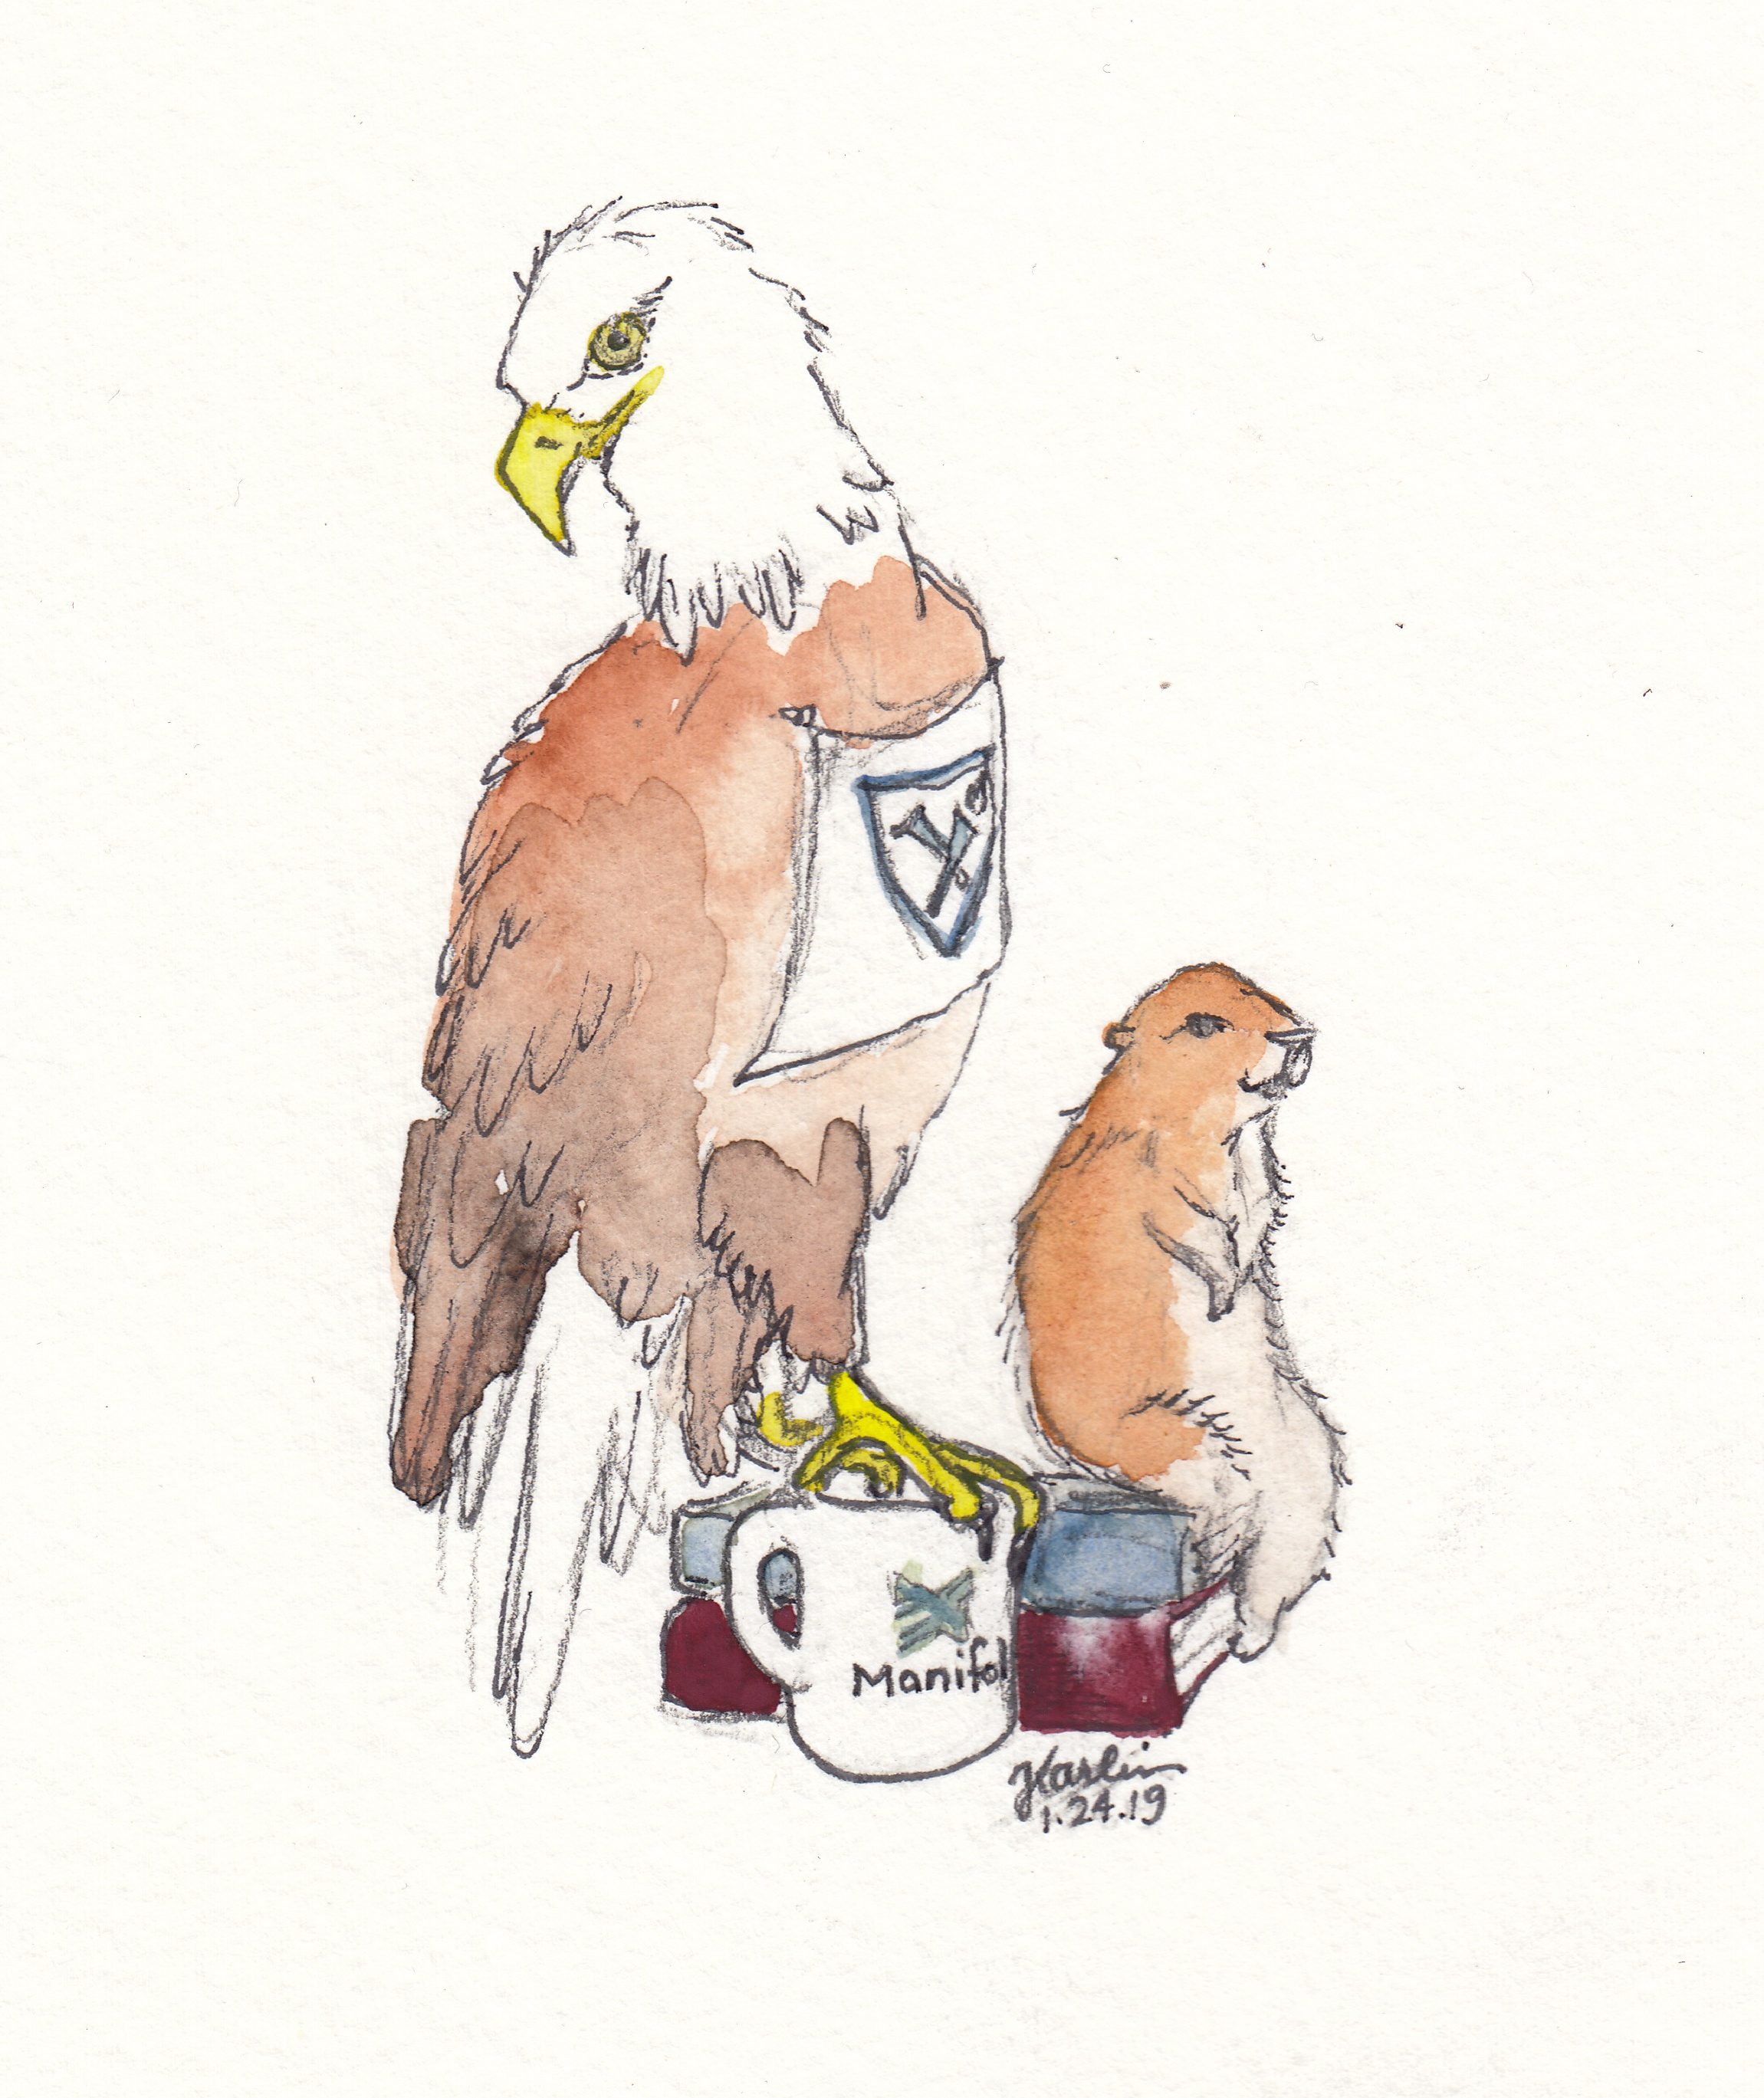 watercolor illustration of Emory eagle and UMinn gopher with books and Manifold mug